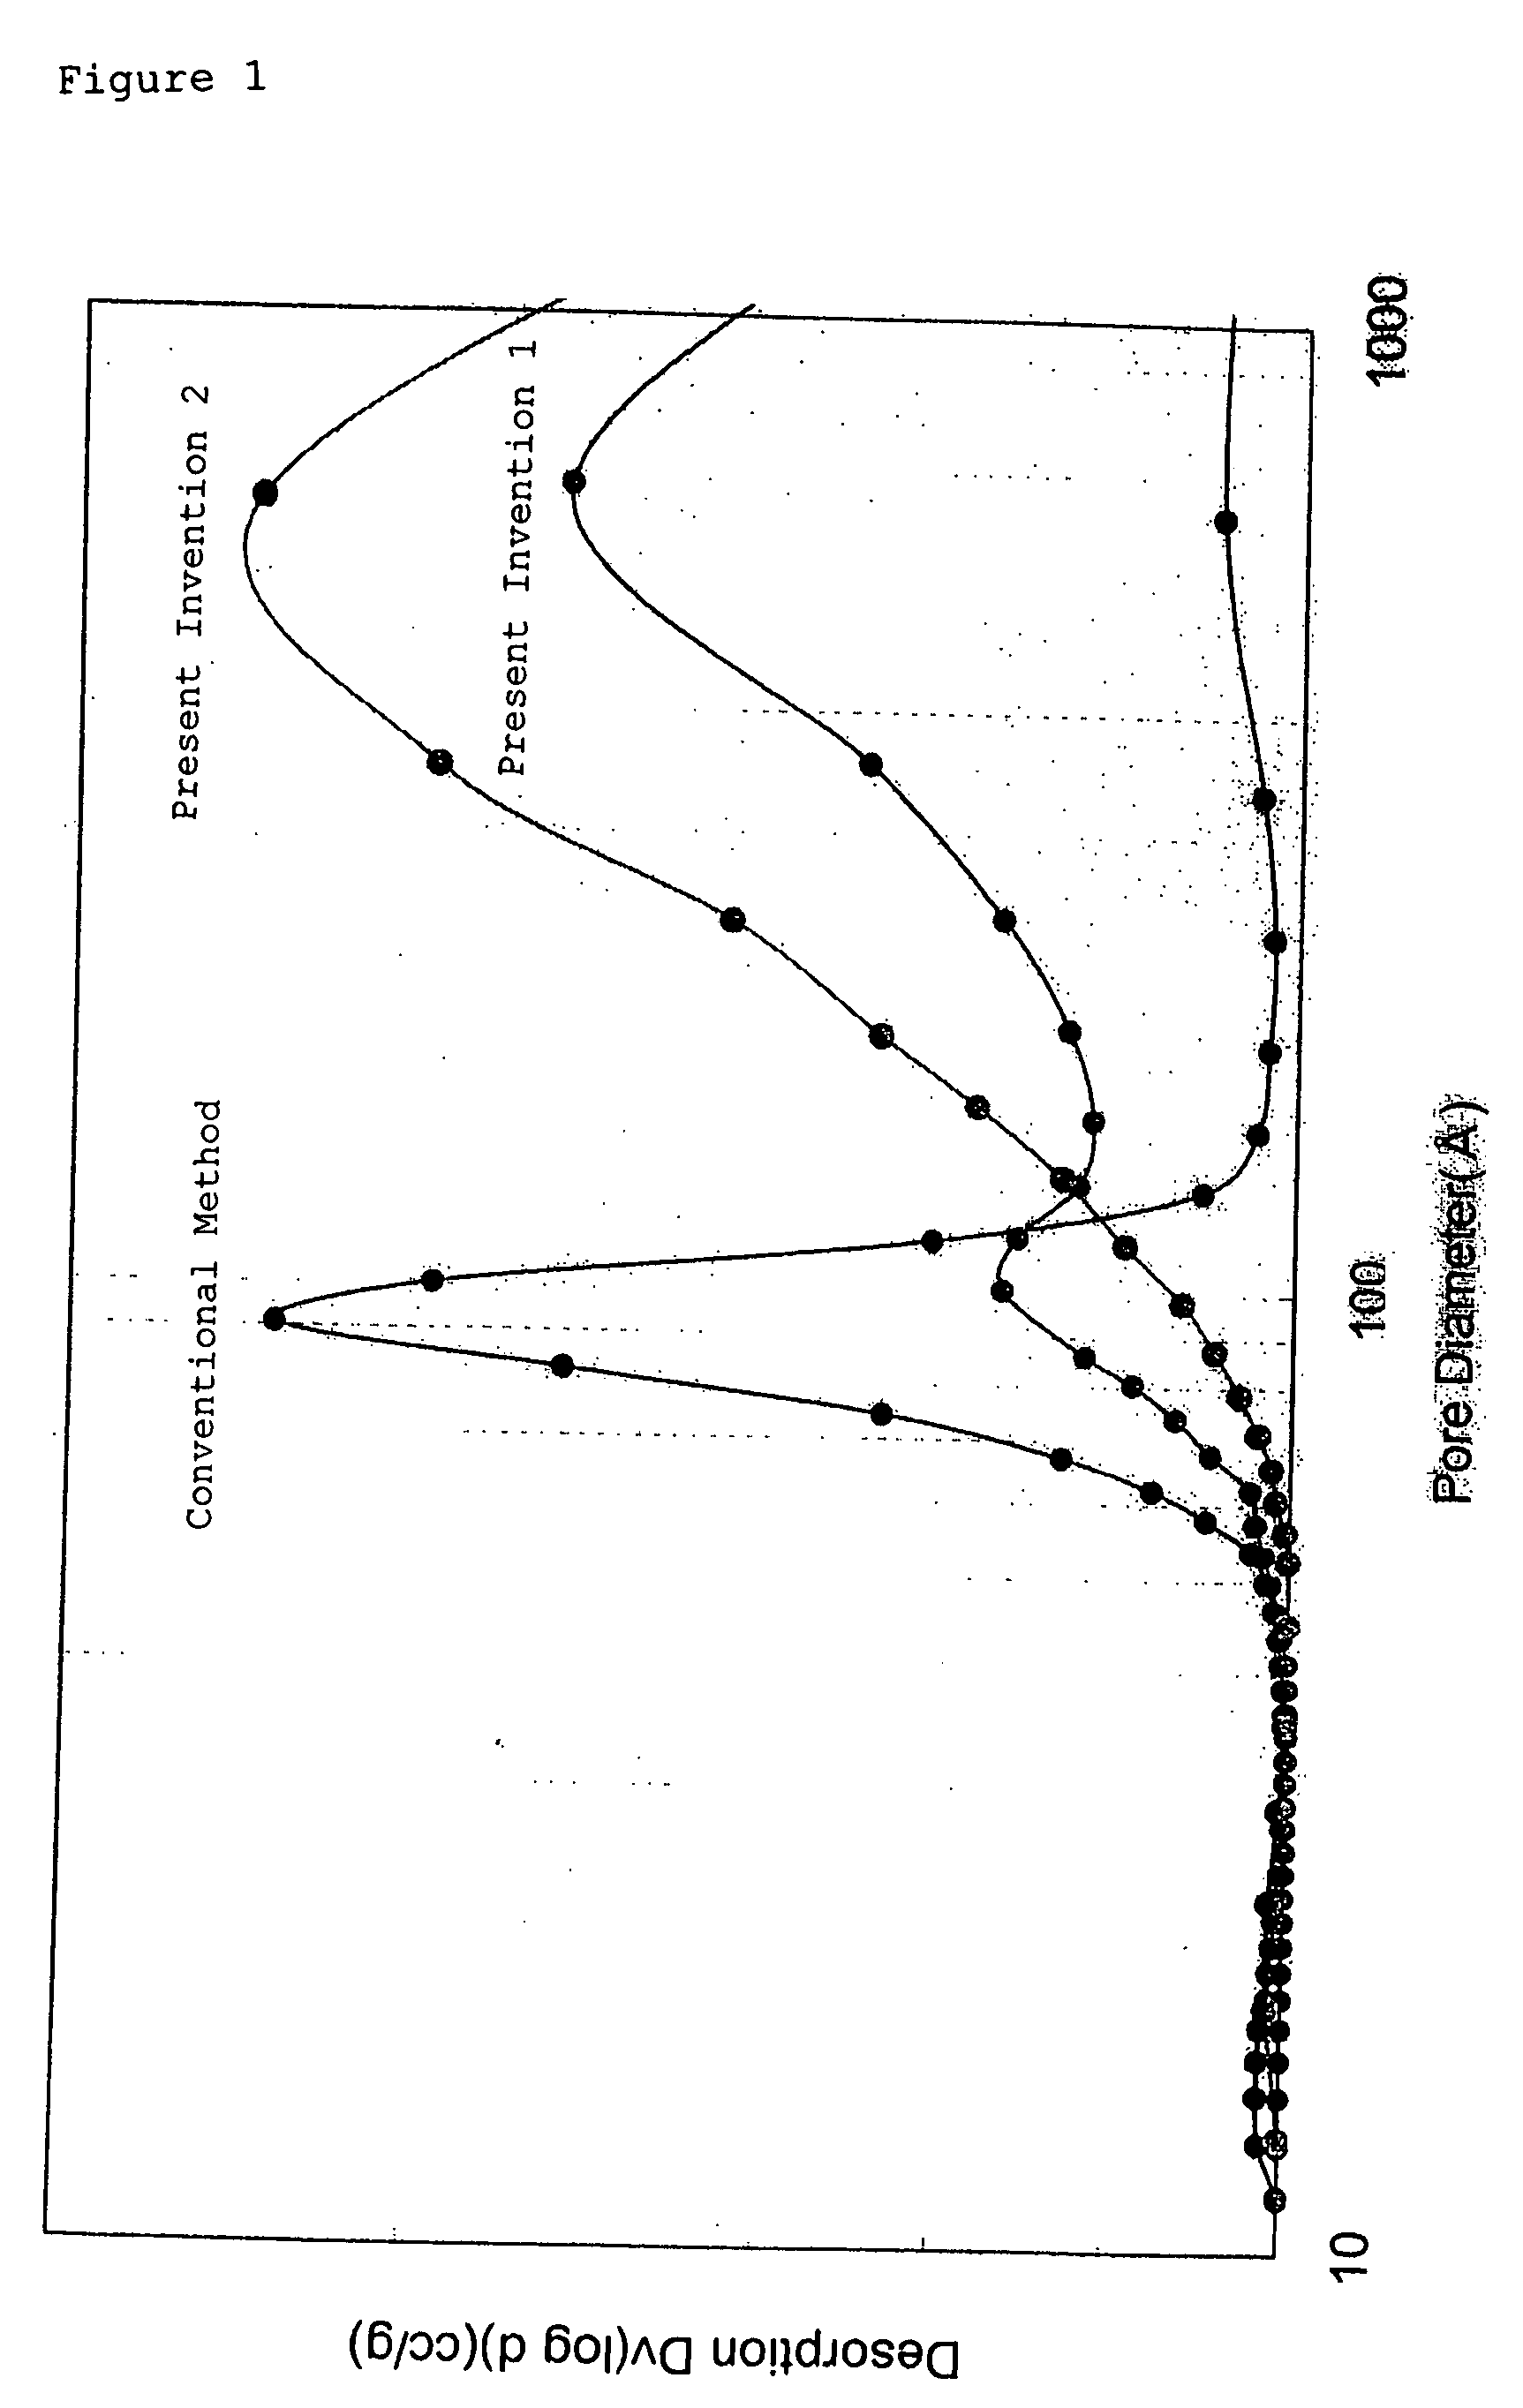 Zirconia porous body and manufacturing method thereof